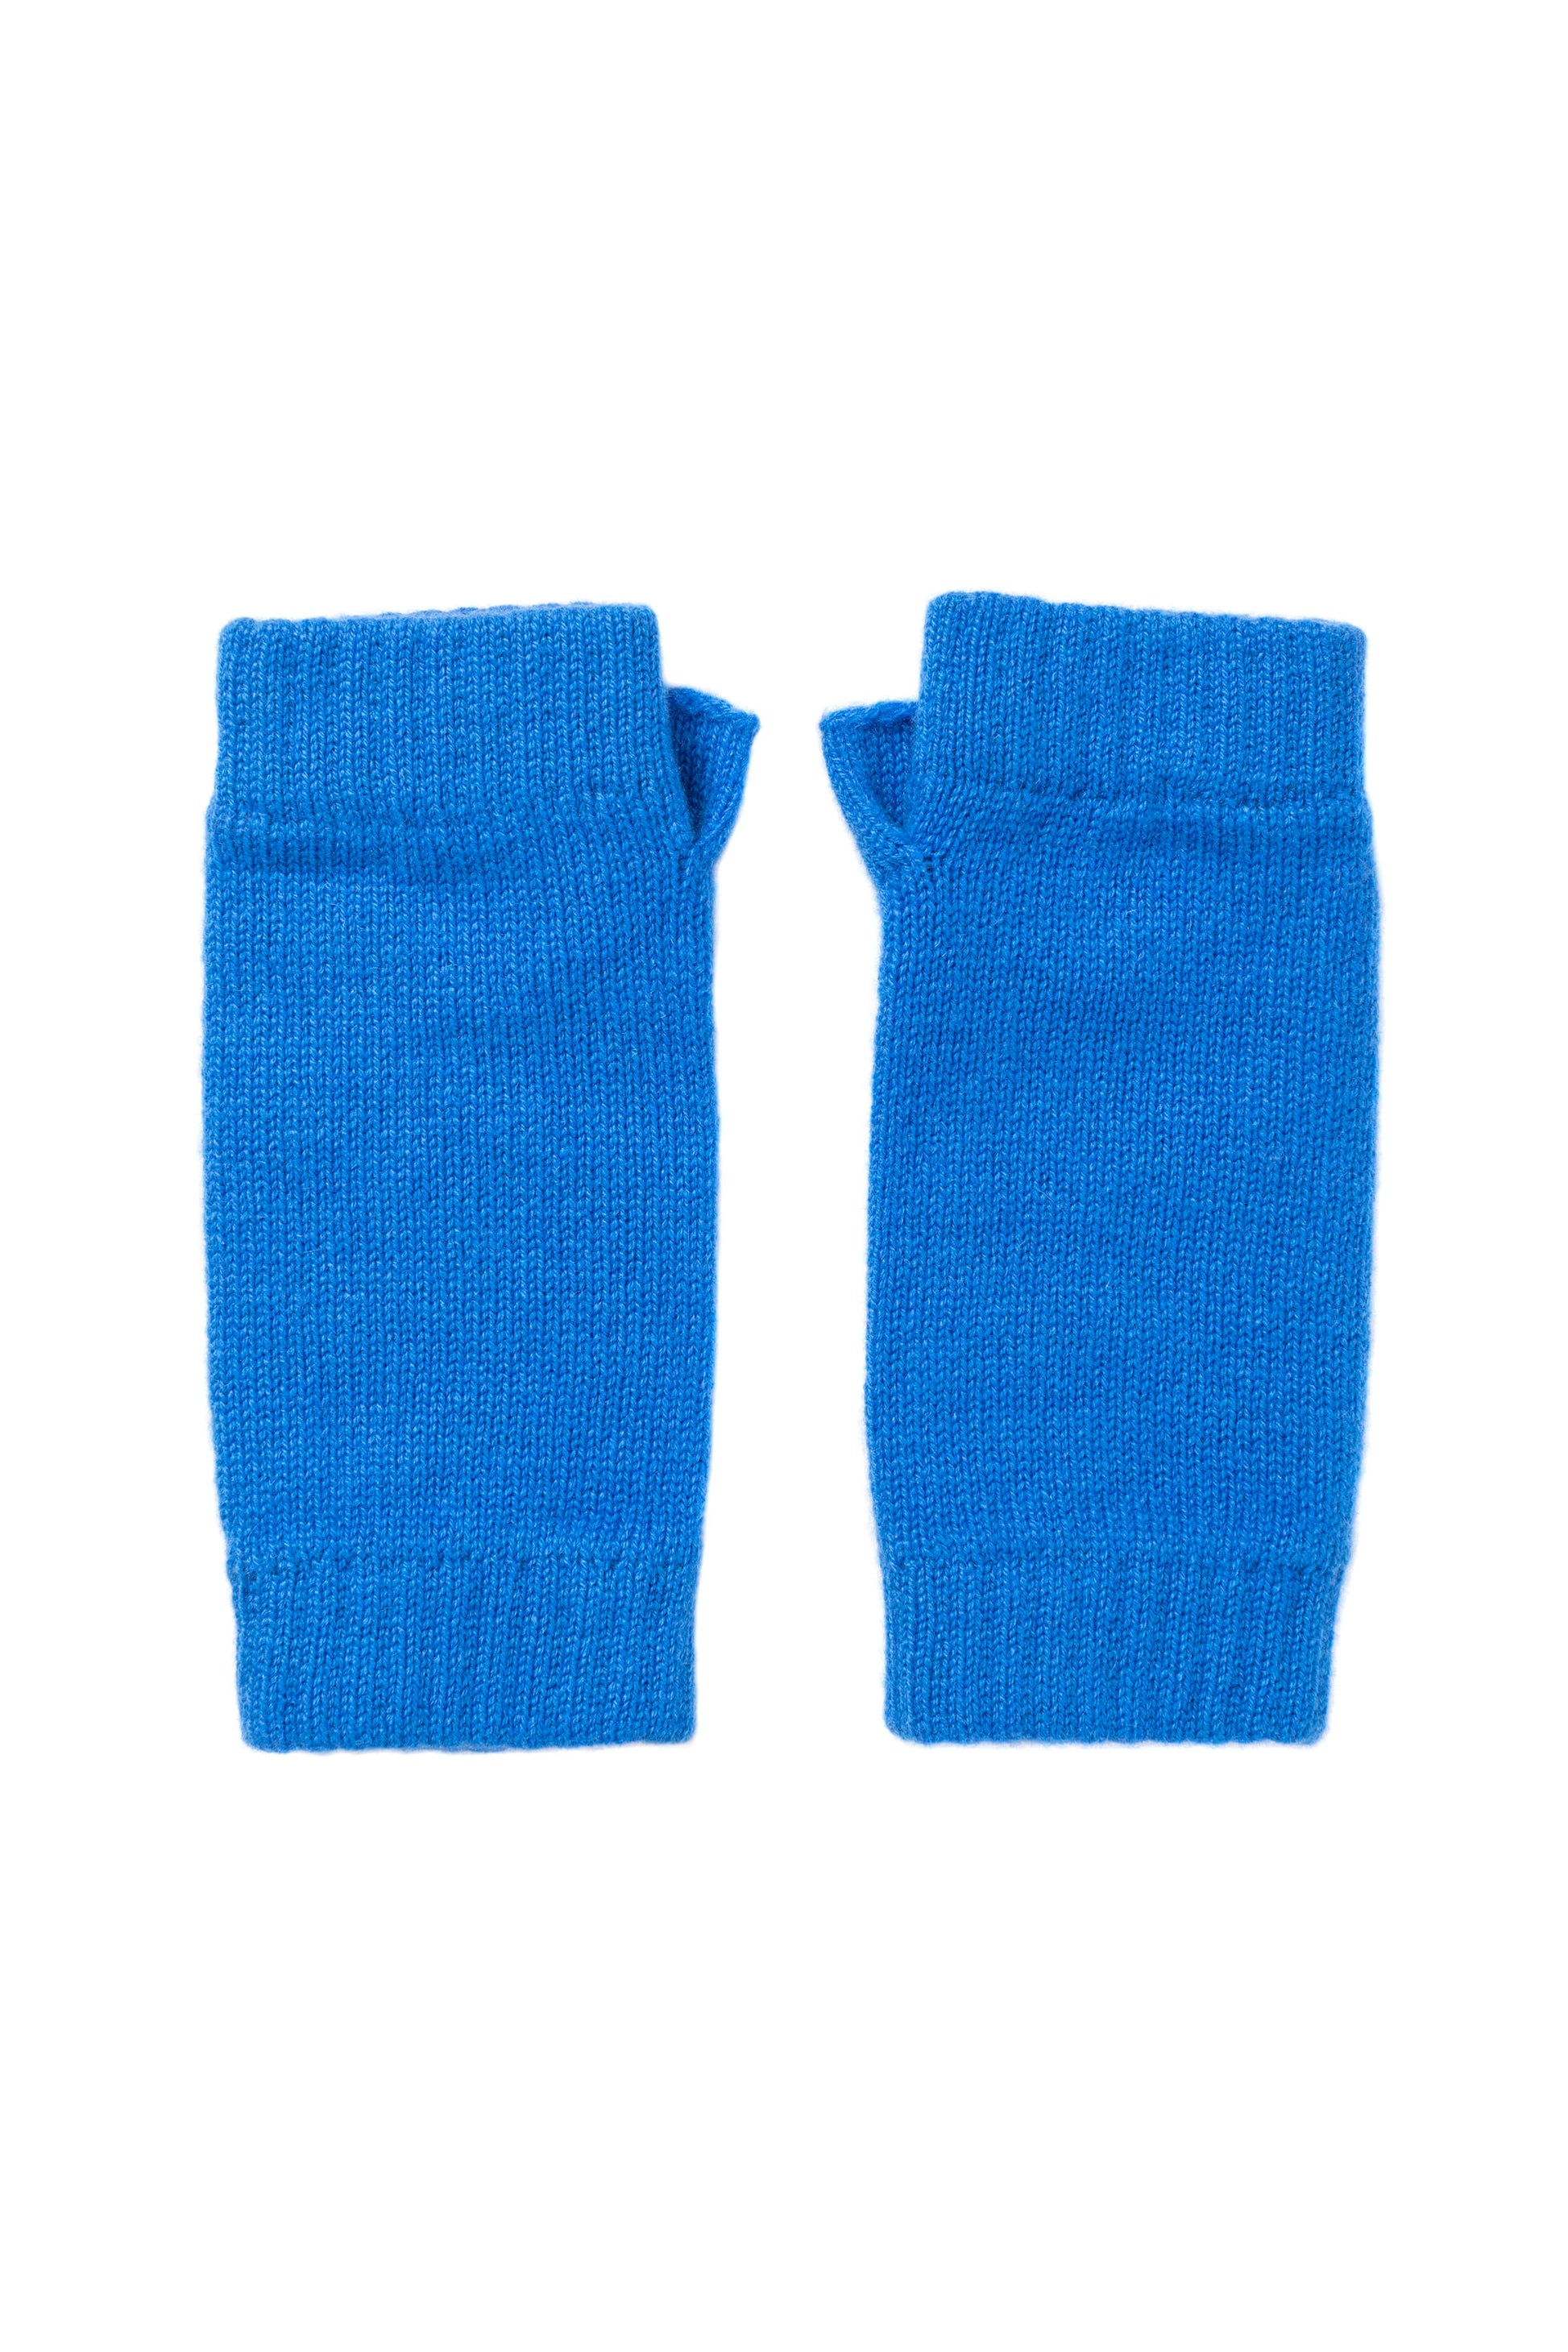 Johnstons of Elgin AW24 Knitted Accessory Orkney Blue Cashmere Wrist Warmers HAD03215SD4991ONE